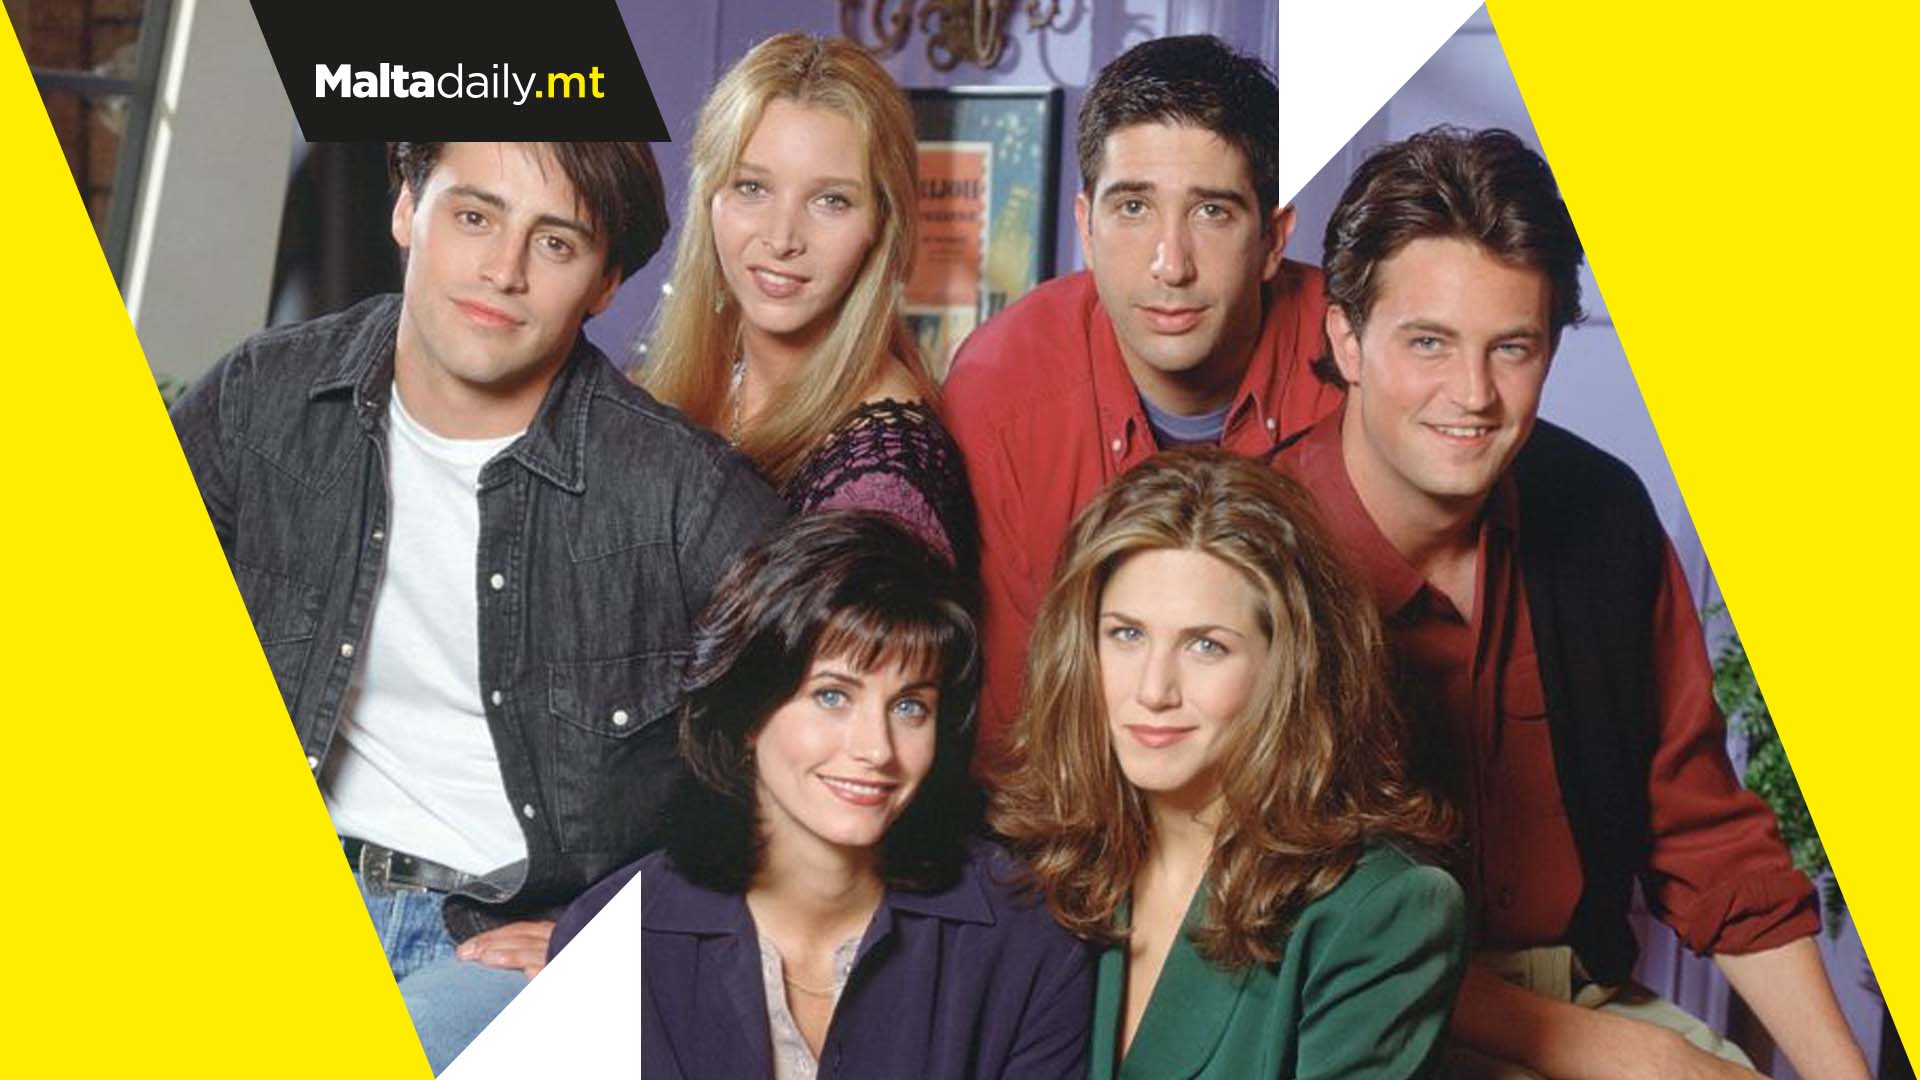 The first ever episode of Friends aired 28 years ago in 1994